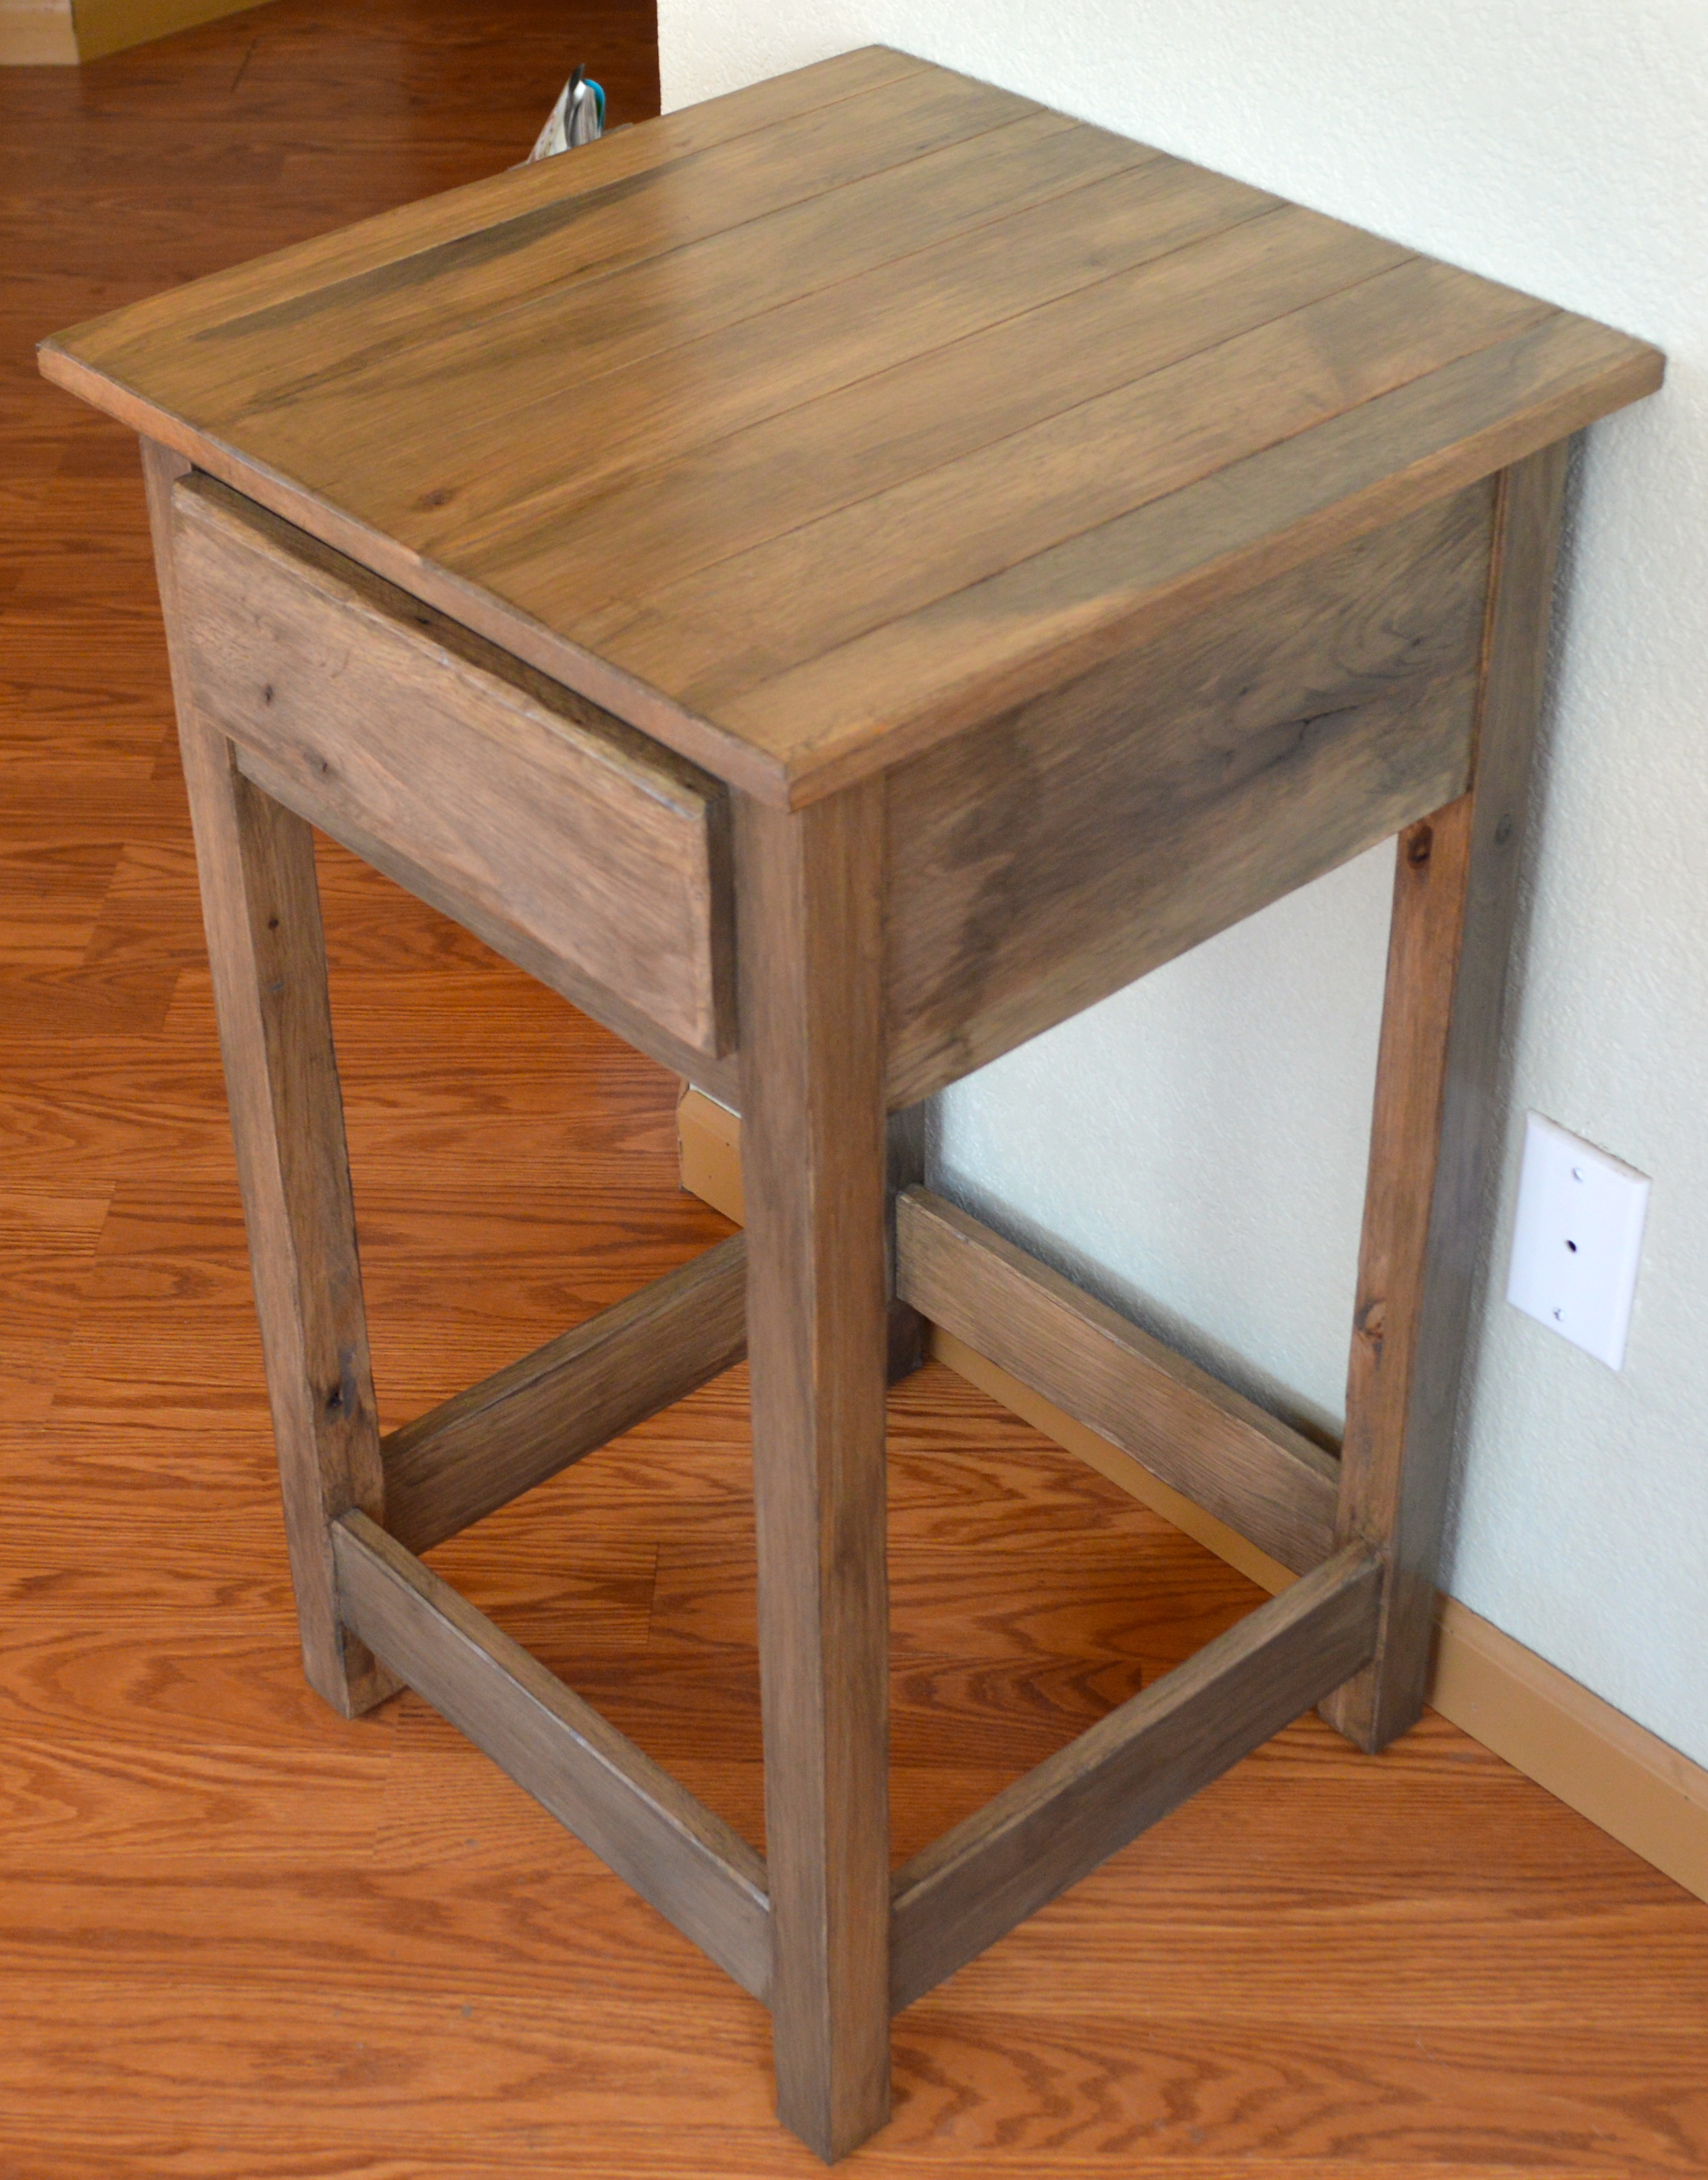 handcrafted woodwork custom furniture franks construction dsc end table with barn door specialty projects tapered legs small mid century ashley kids inch tall accent carolina